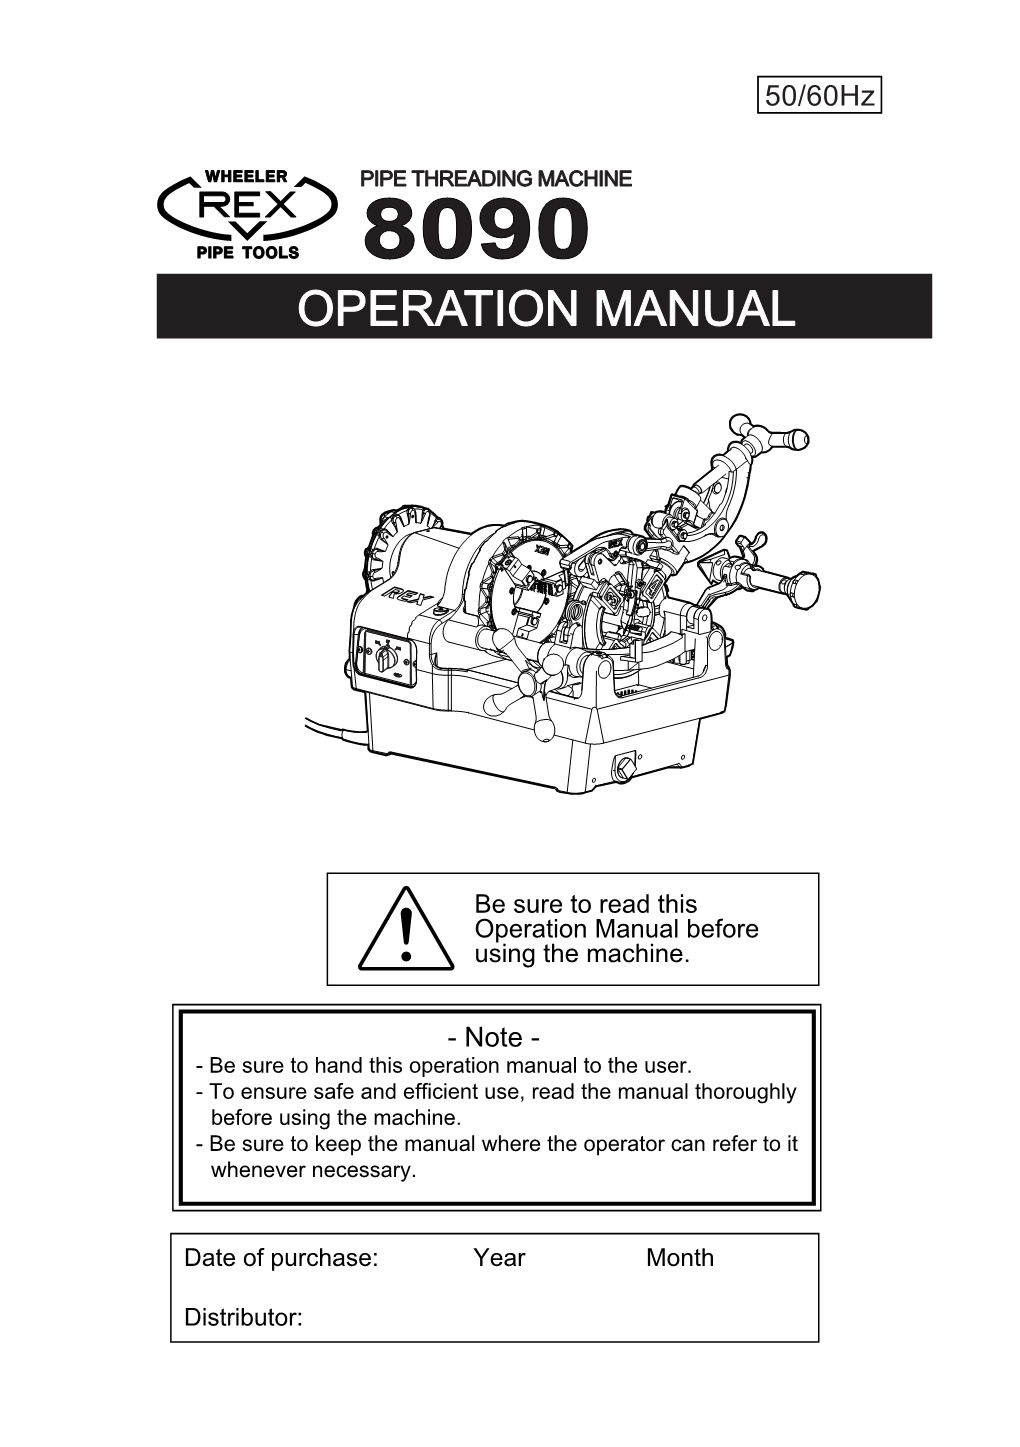 8090 Operation Booklet